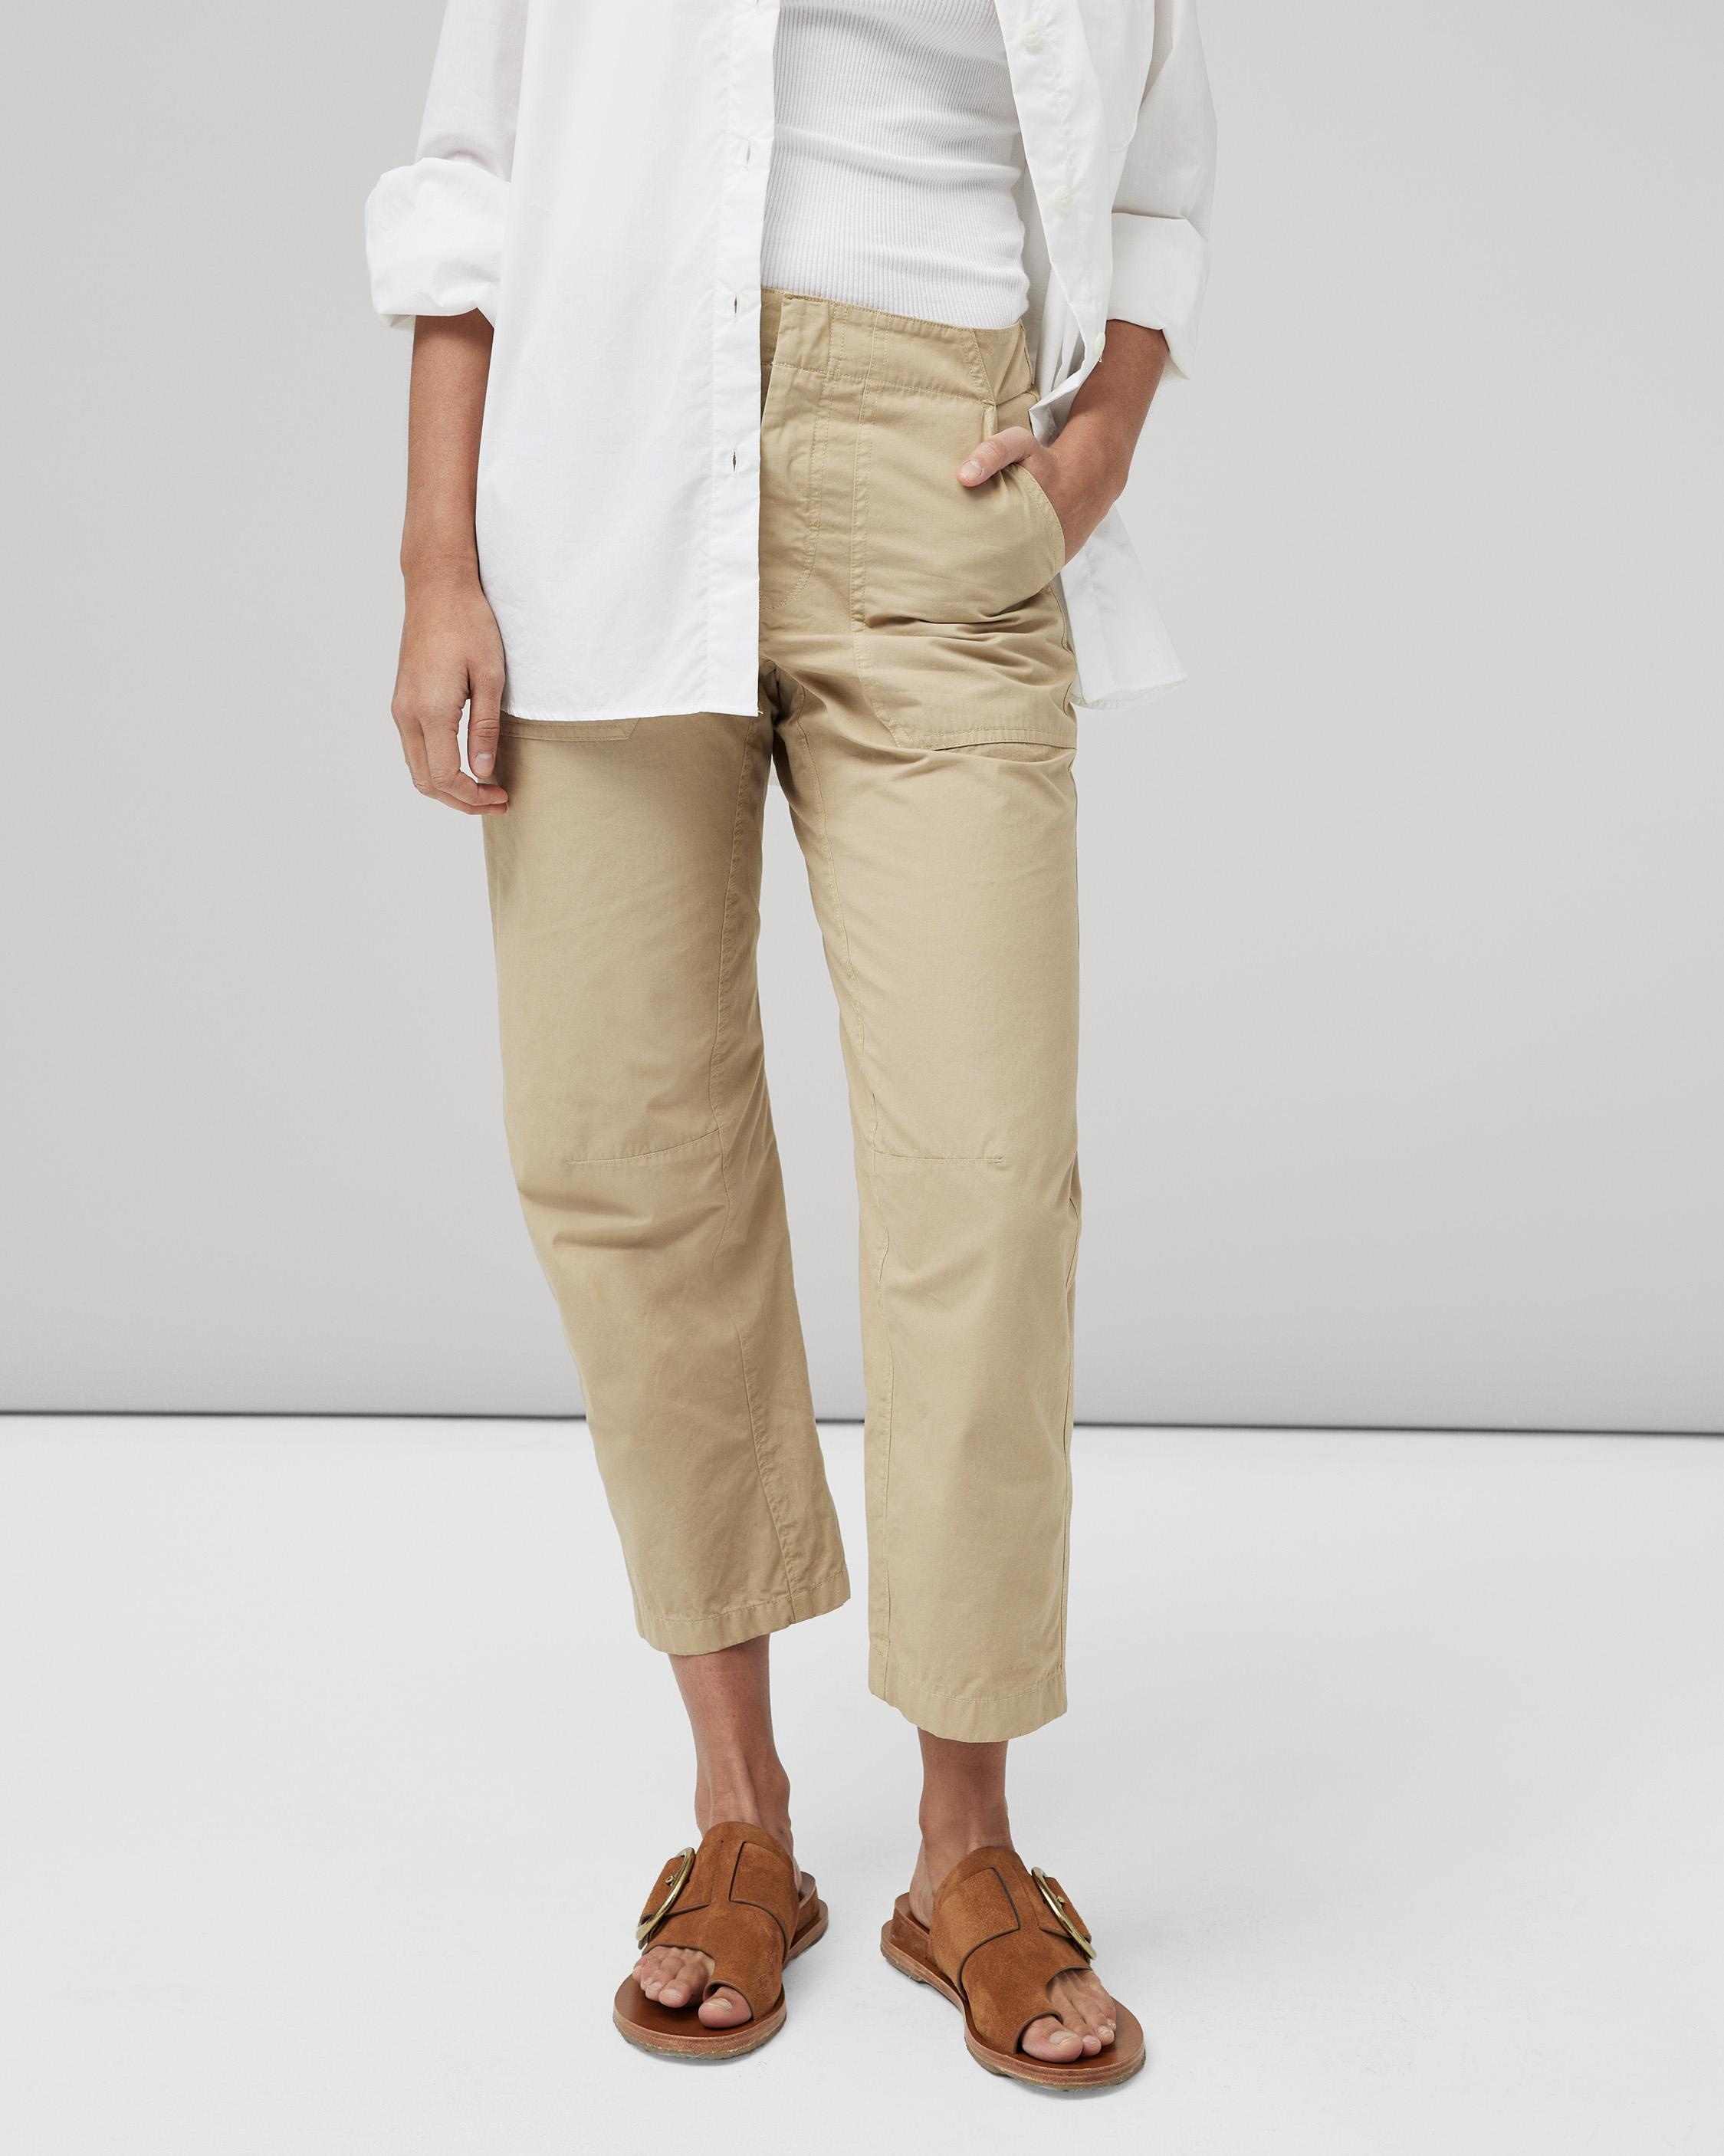 Leyton Workwear Cotton Pant
Relaxed Fit - 7